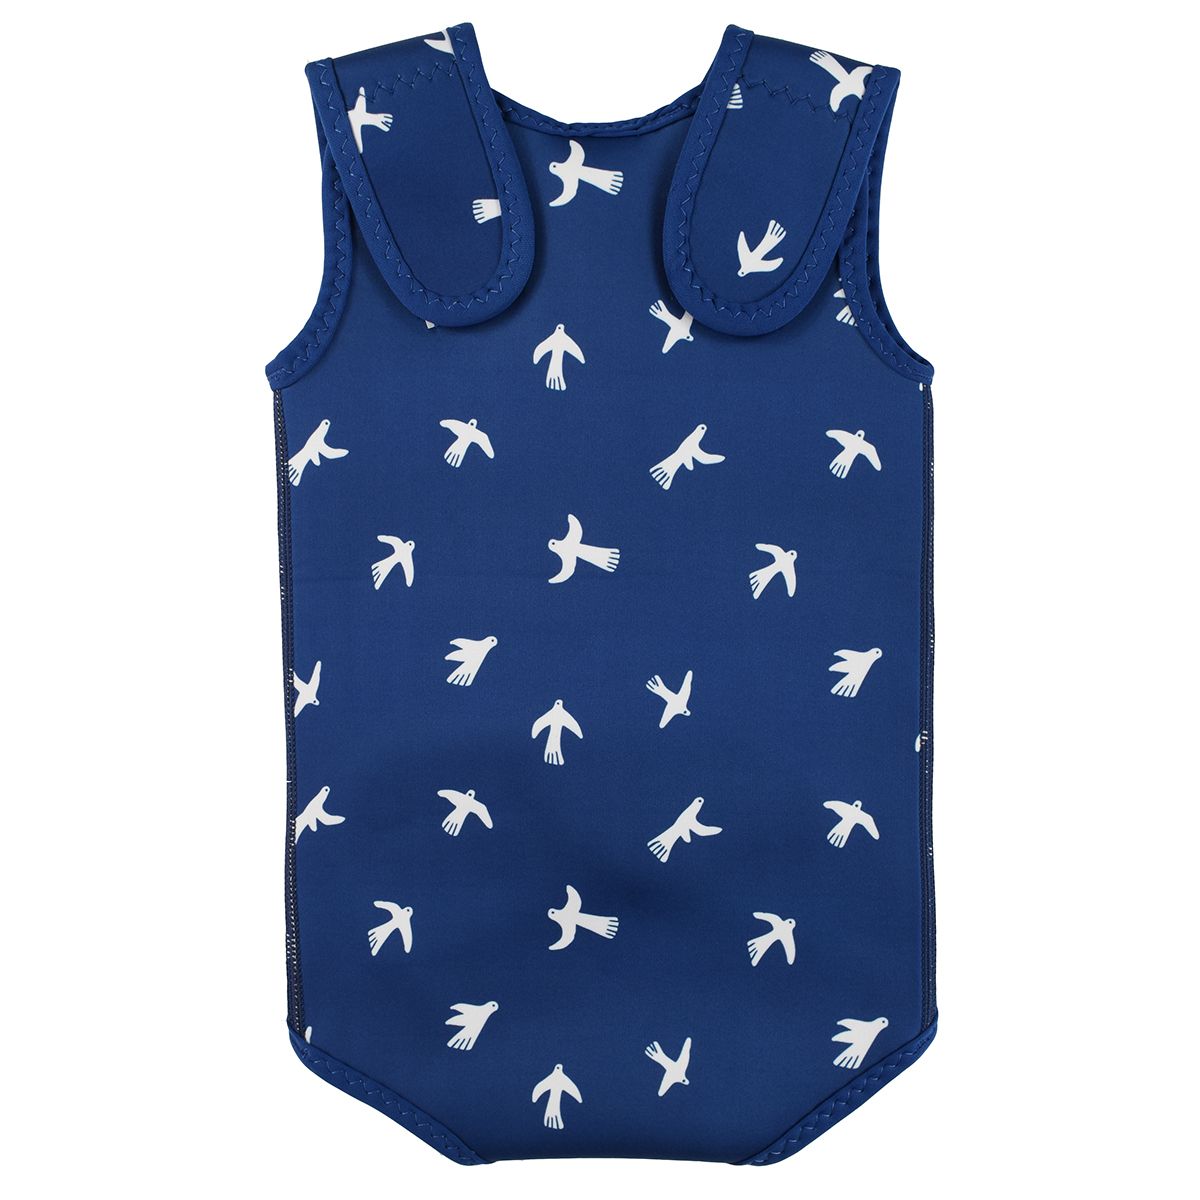 Baby Wrap wetsuit in navy blue with white doves themed print. Back.